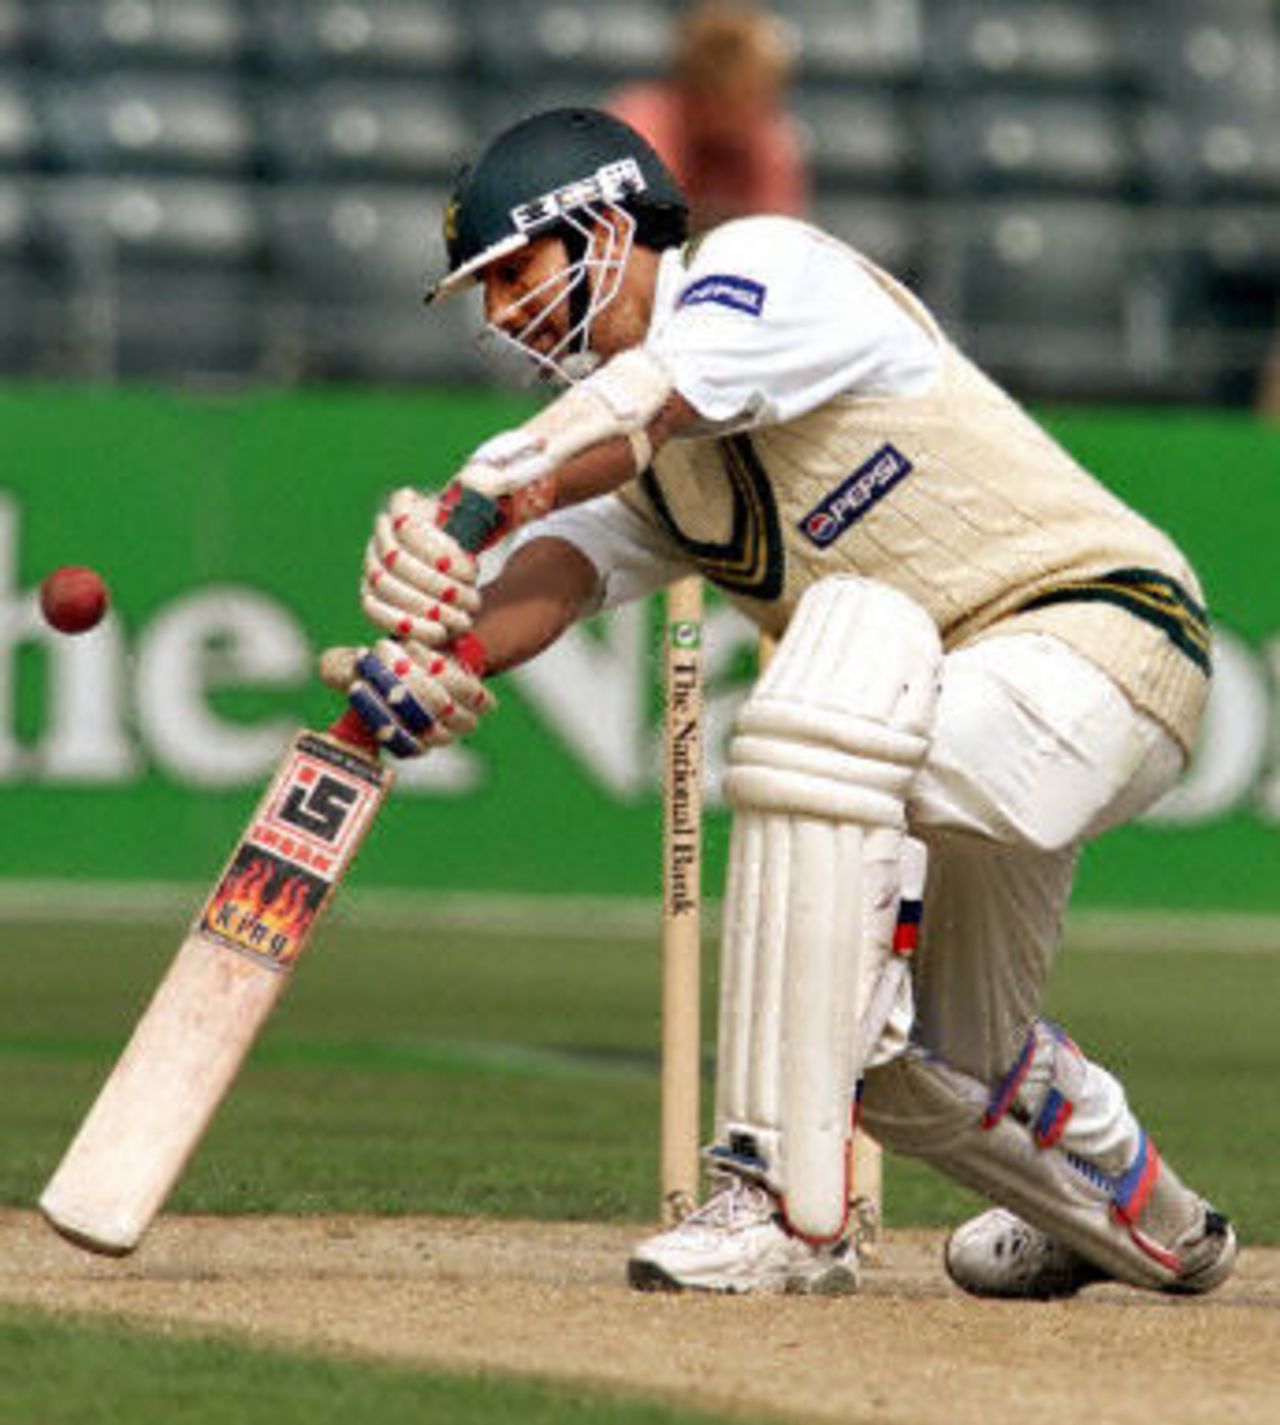 Pakistan batsman Yousuf Youhana steers a ball to third man on the way to scoring a double century, day 4, 2nd Test at Christchurch, 15-19 March 2001.